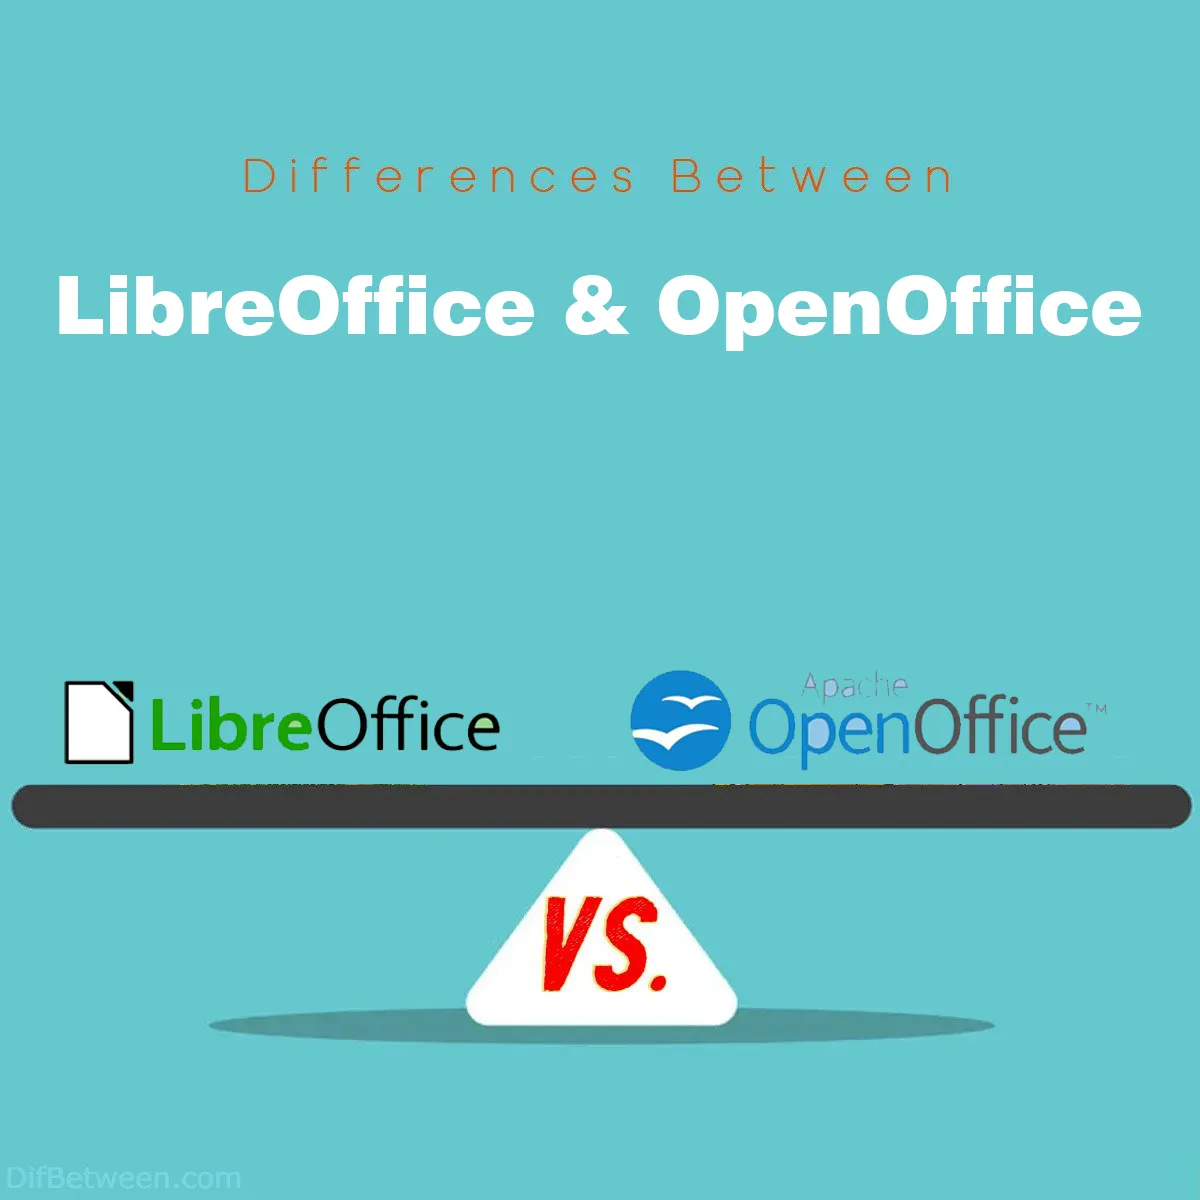 Differences Between LibreOffice and OpenOffice